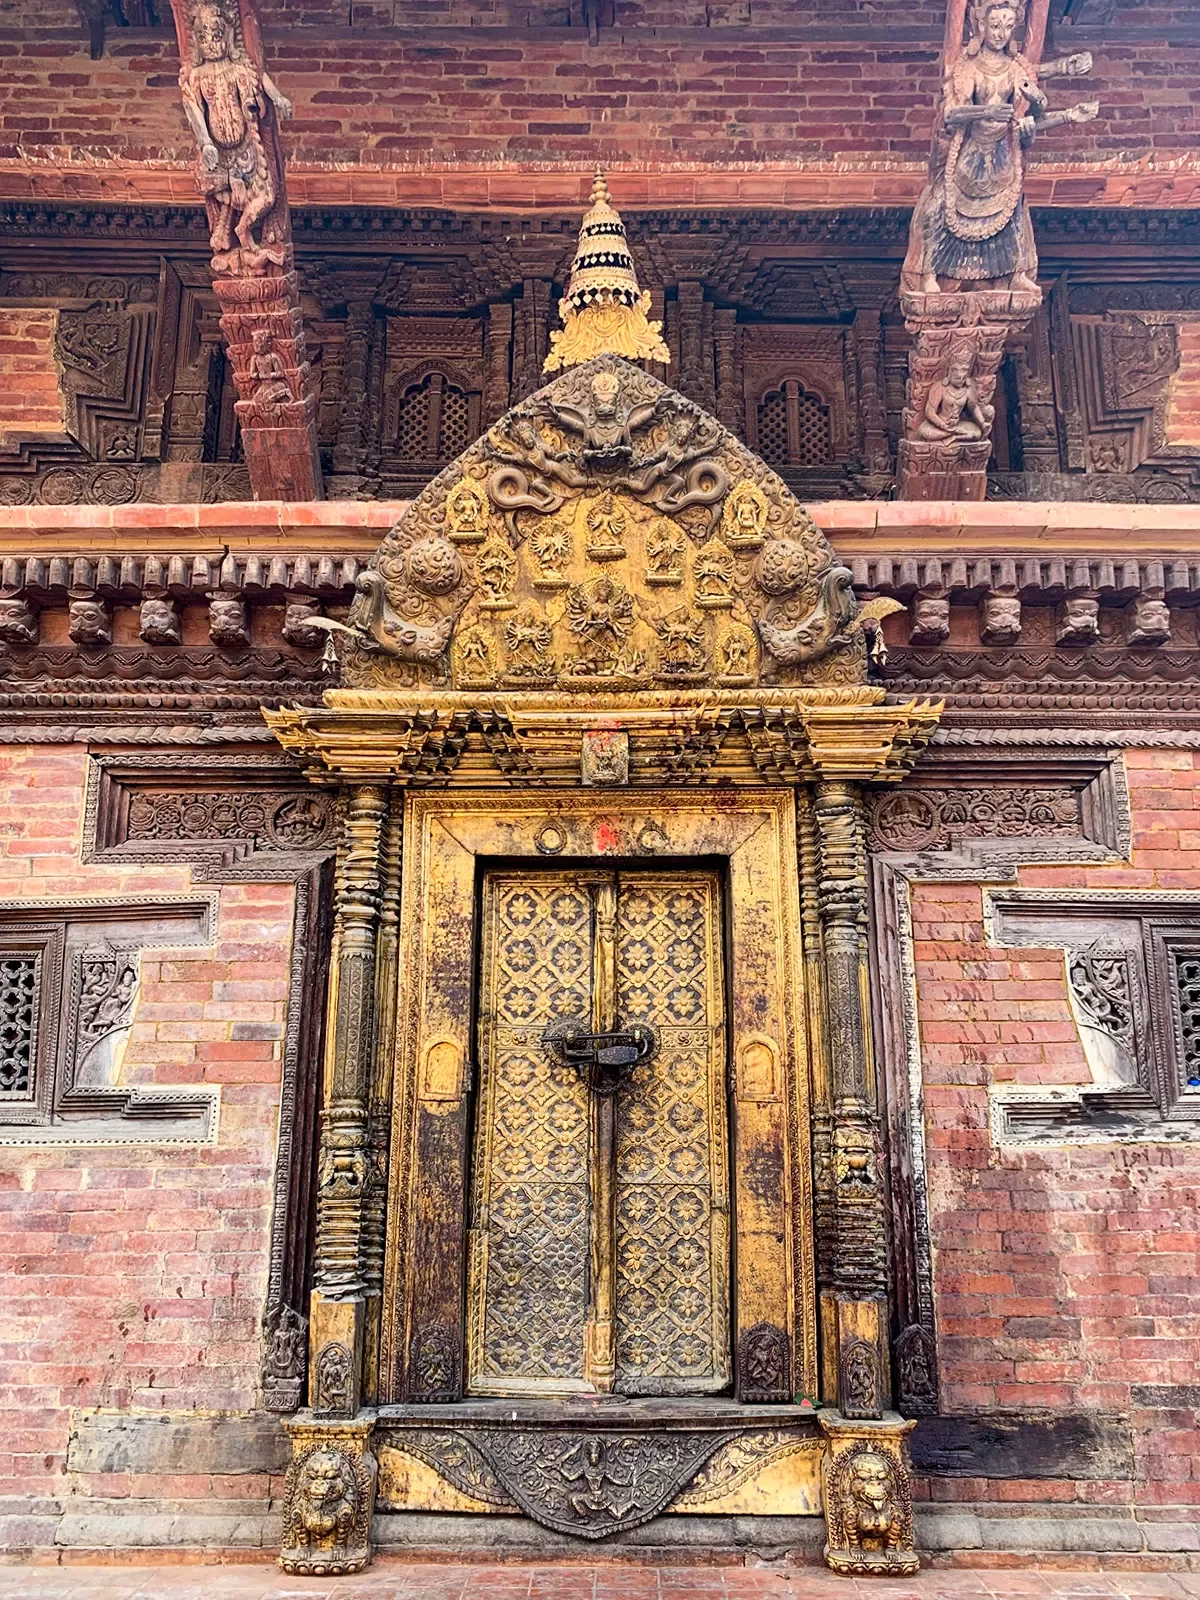 Ancient and ornate gate and door in Nepal